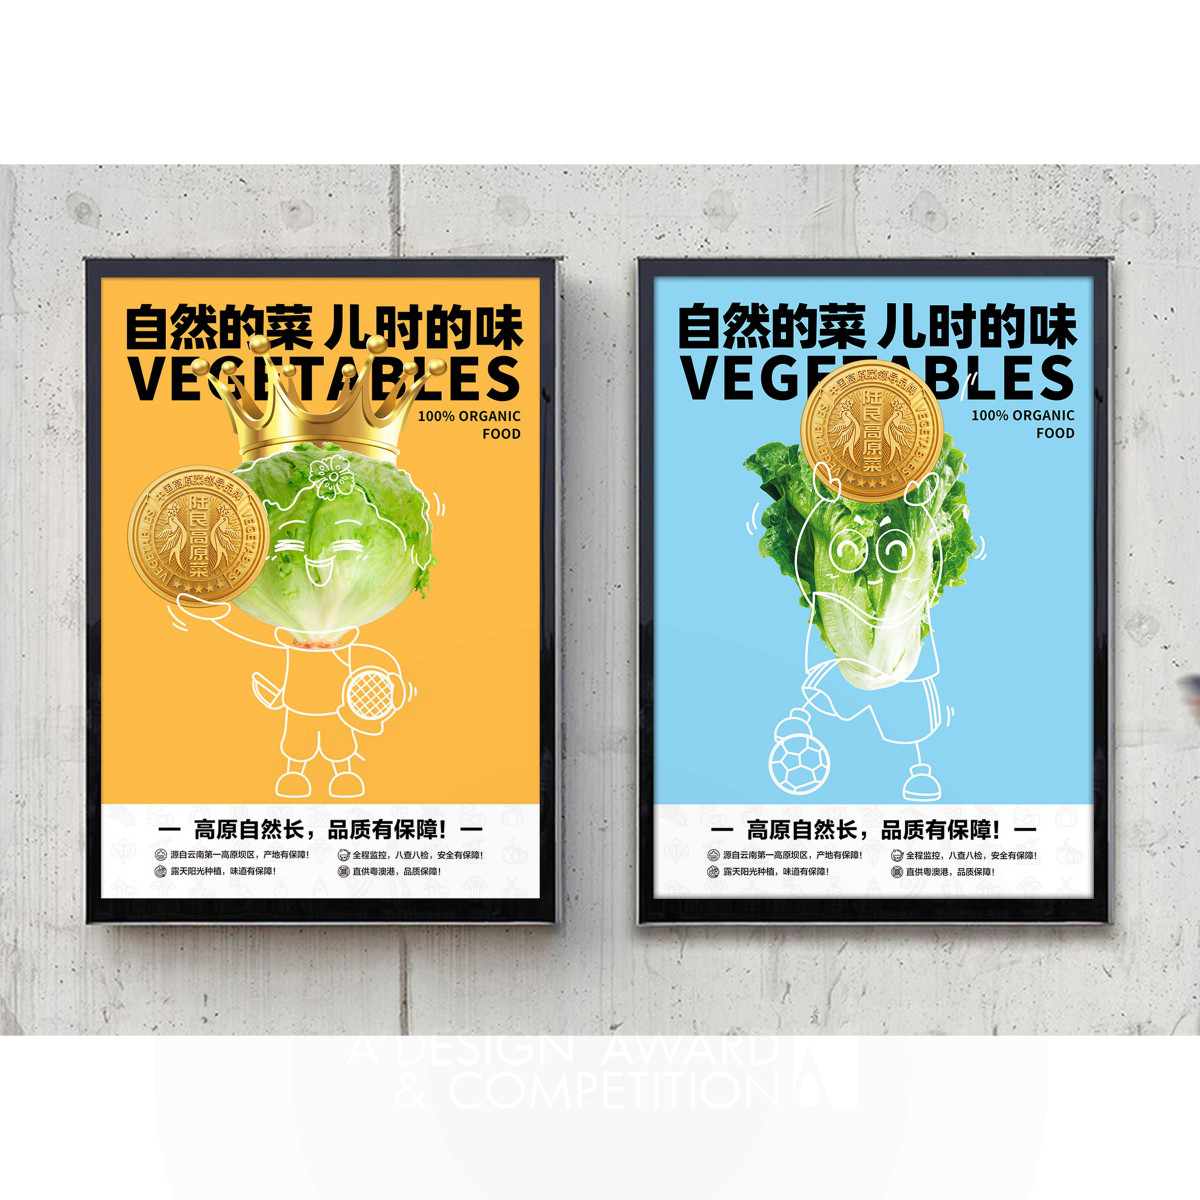 Luliang Highland Vegetables Brand Identity by Xun Gao